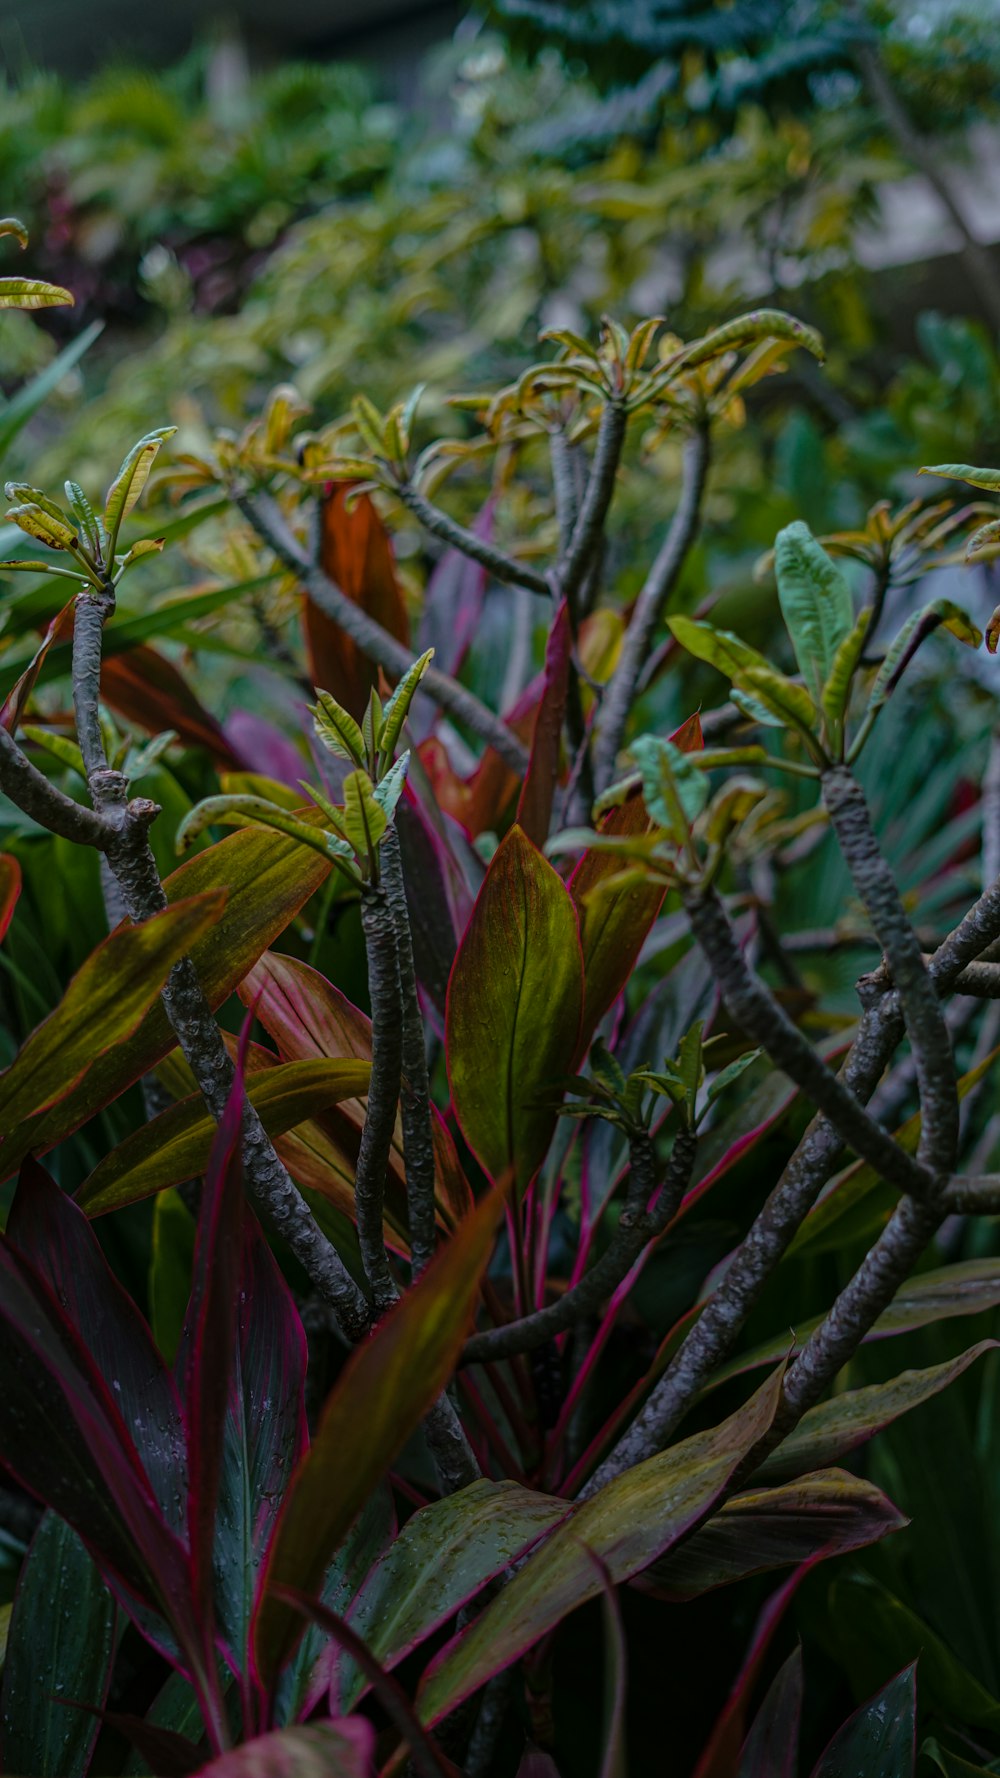 a close-up of some plants